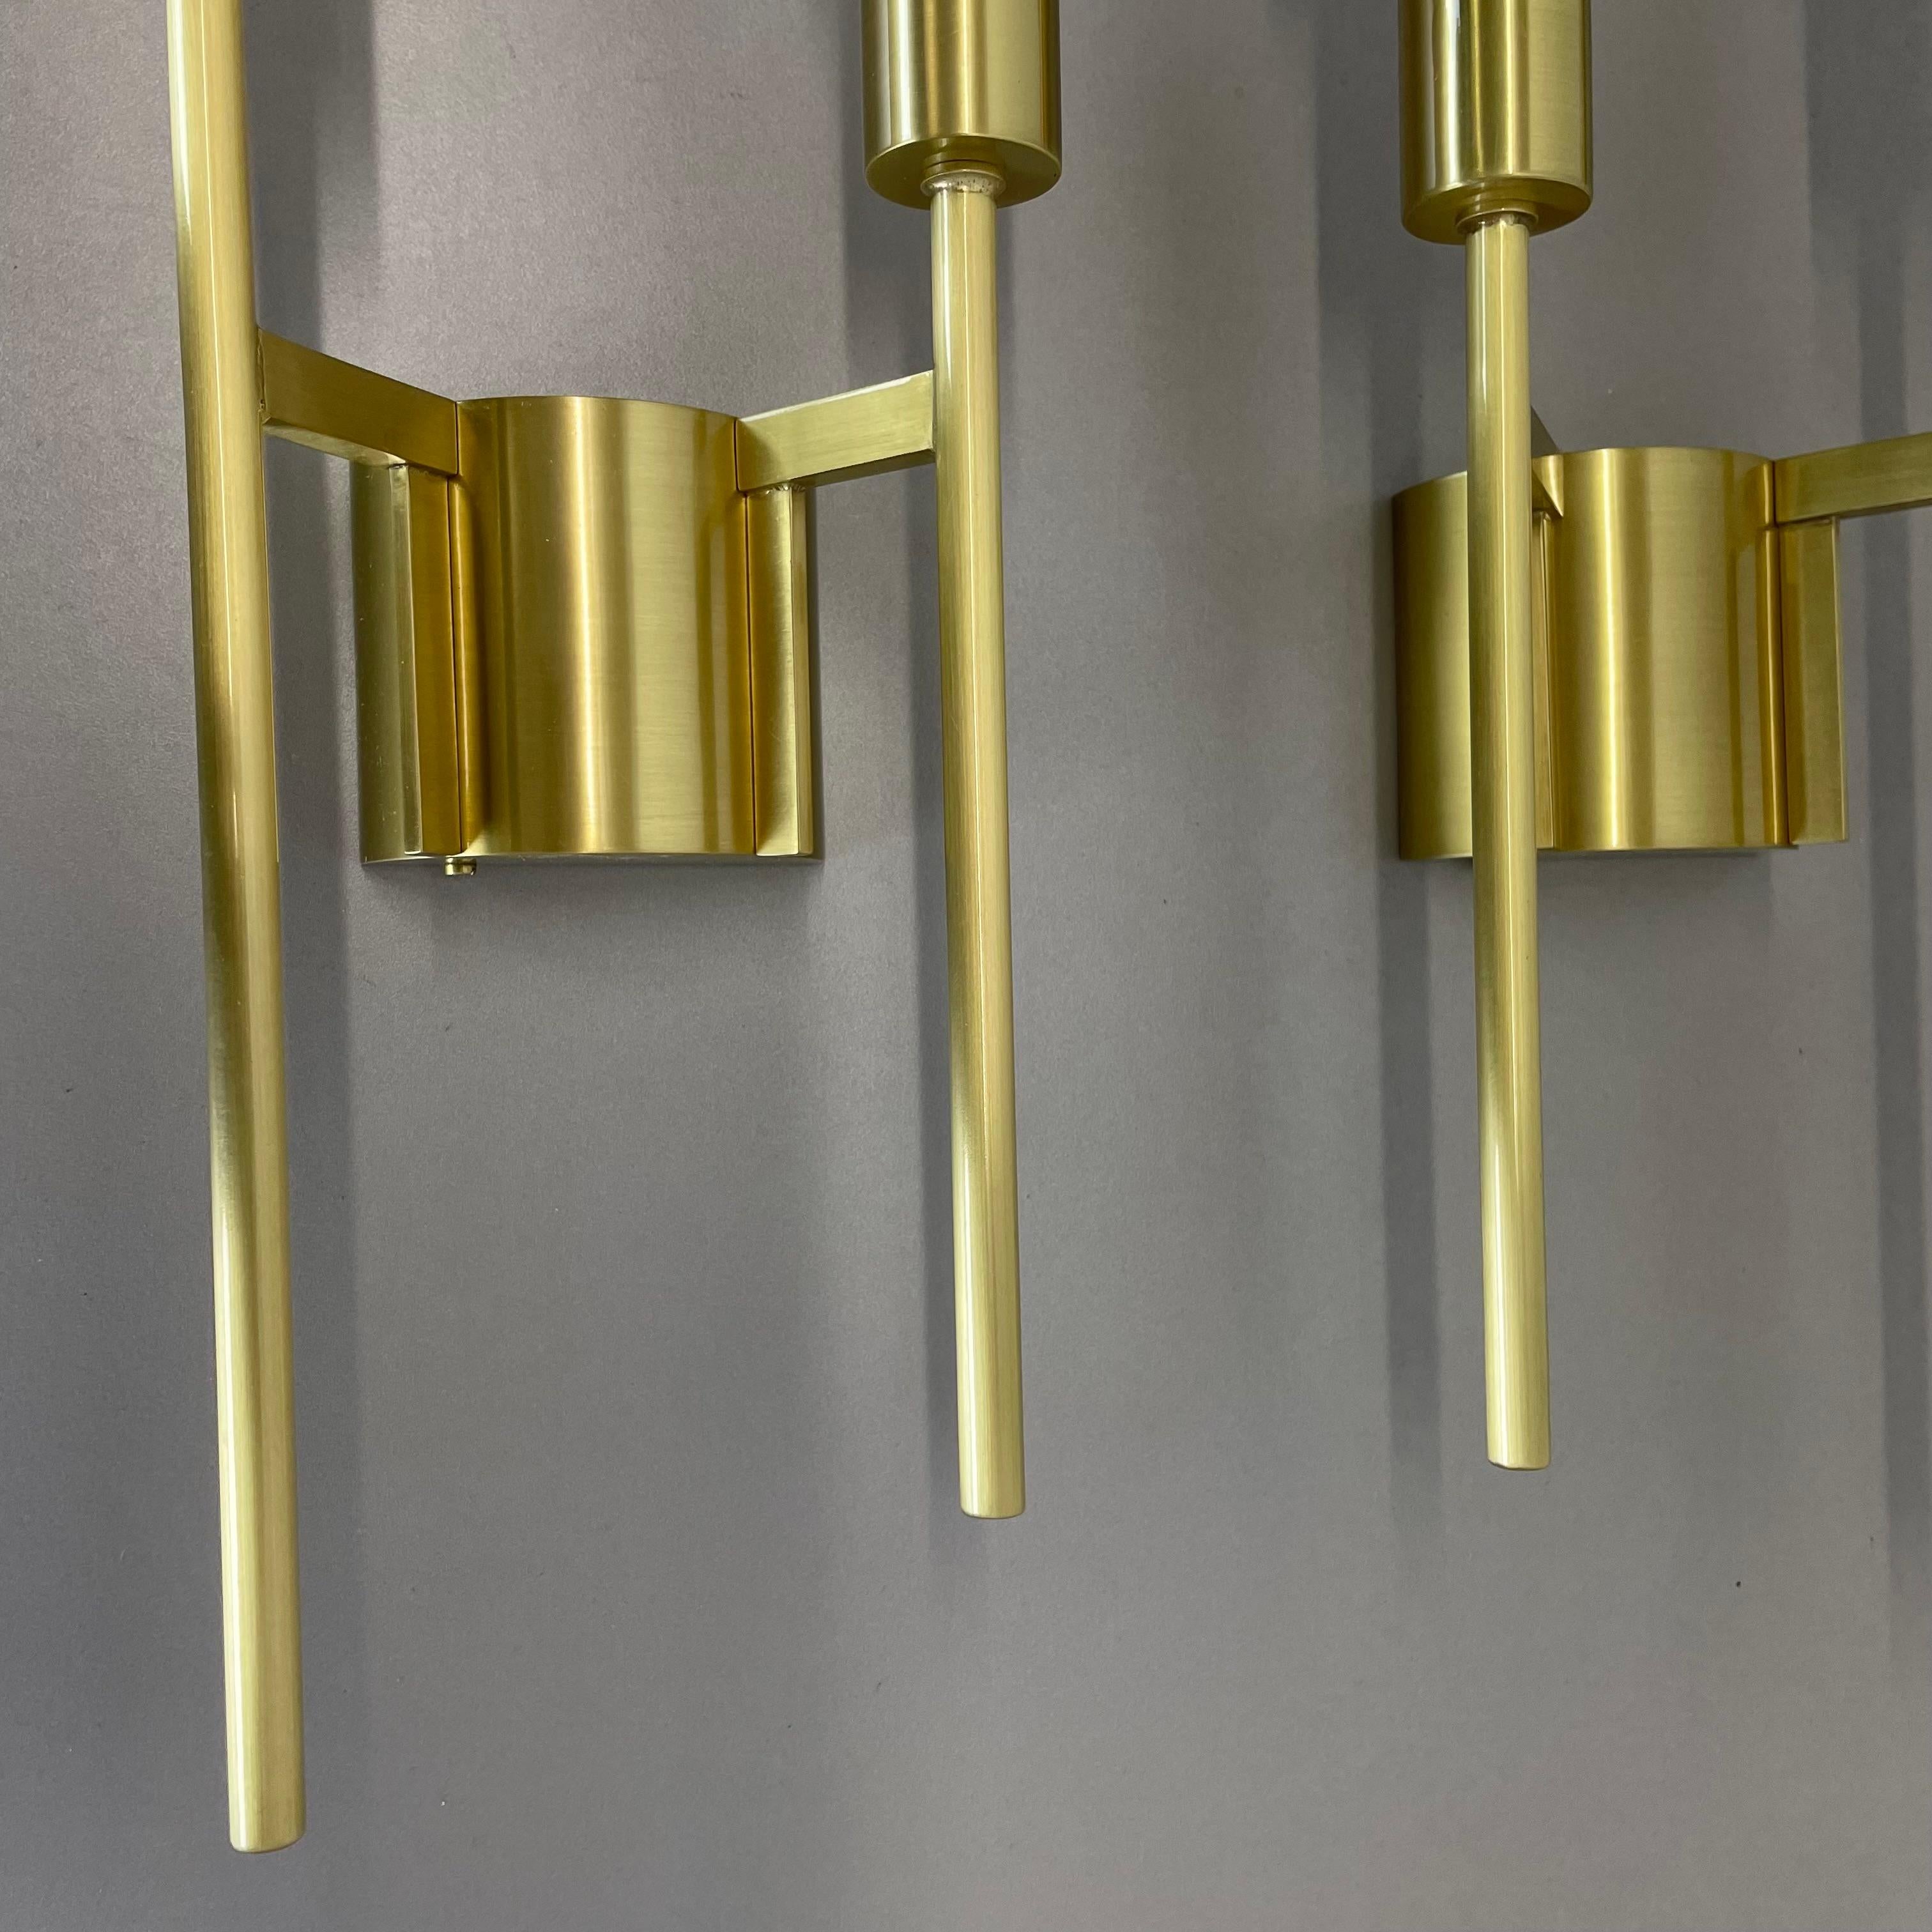 set of 2 Brass Italian Stilnovo Style Theatre Wall Light Sconces, Italy, 1950s For Sale 1